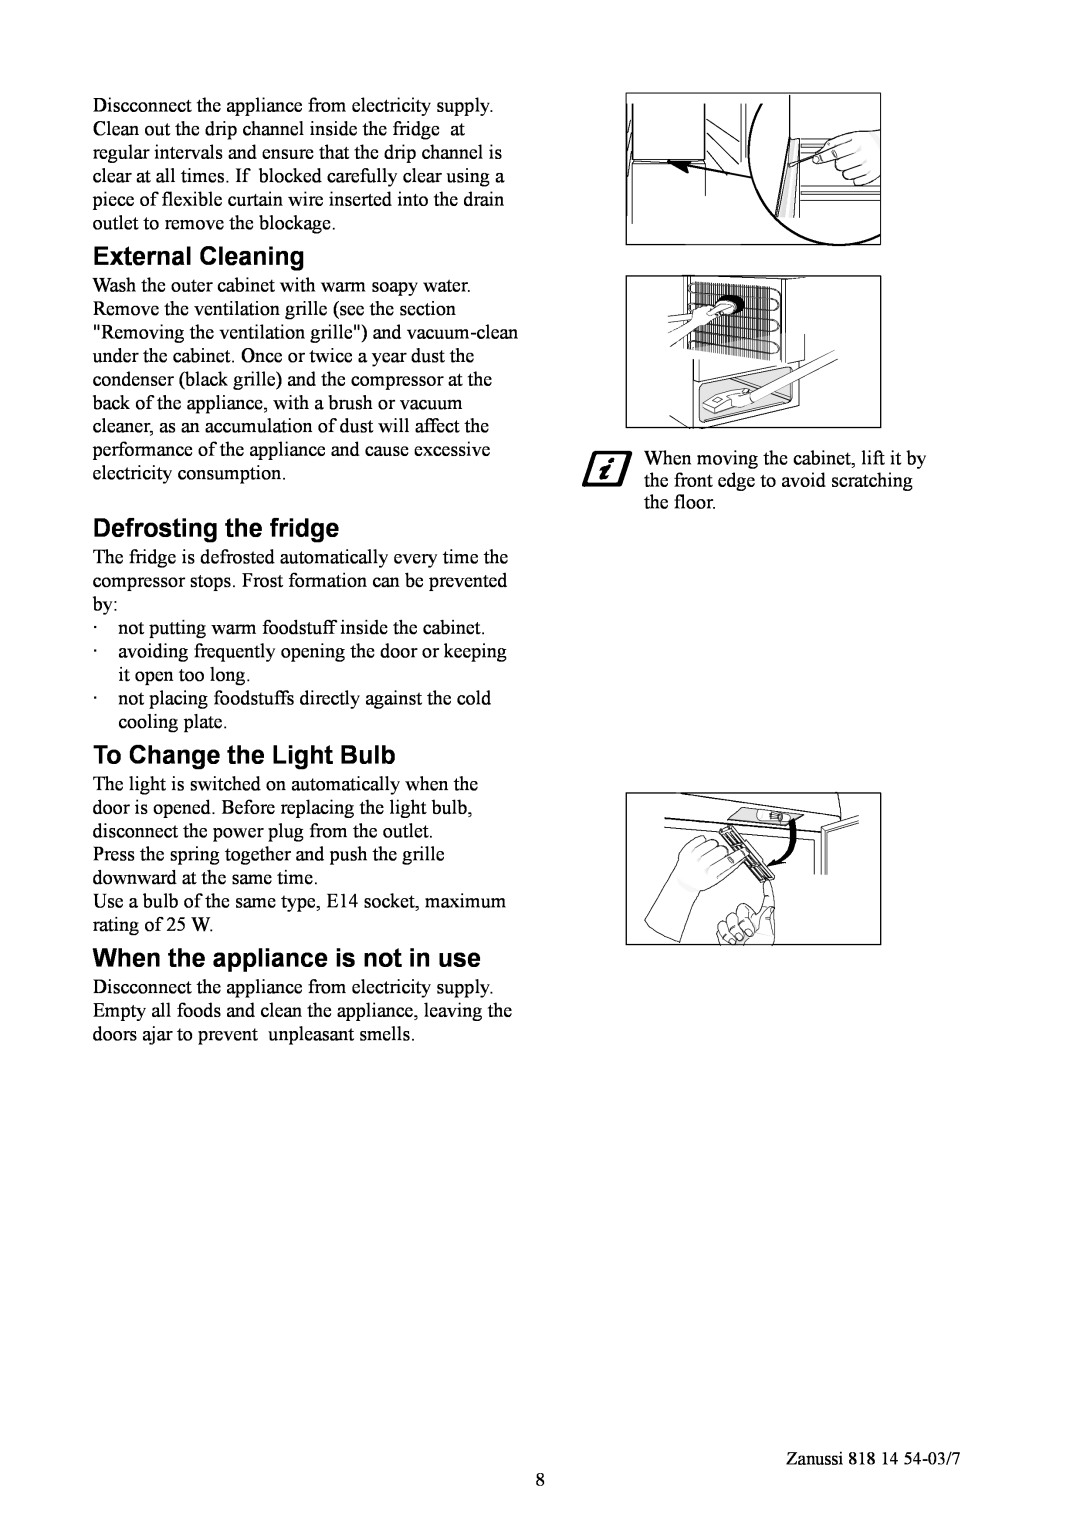 Zanussi ZCR135R manual External Cleaning, Defrosting the fridge, To Change the Light Bulb, When the appliance is not in use 